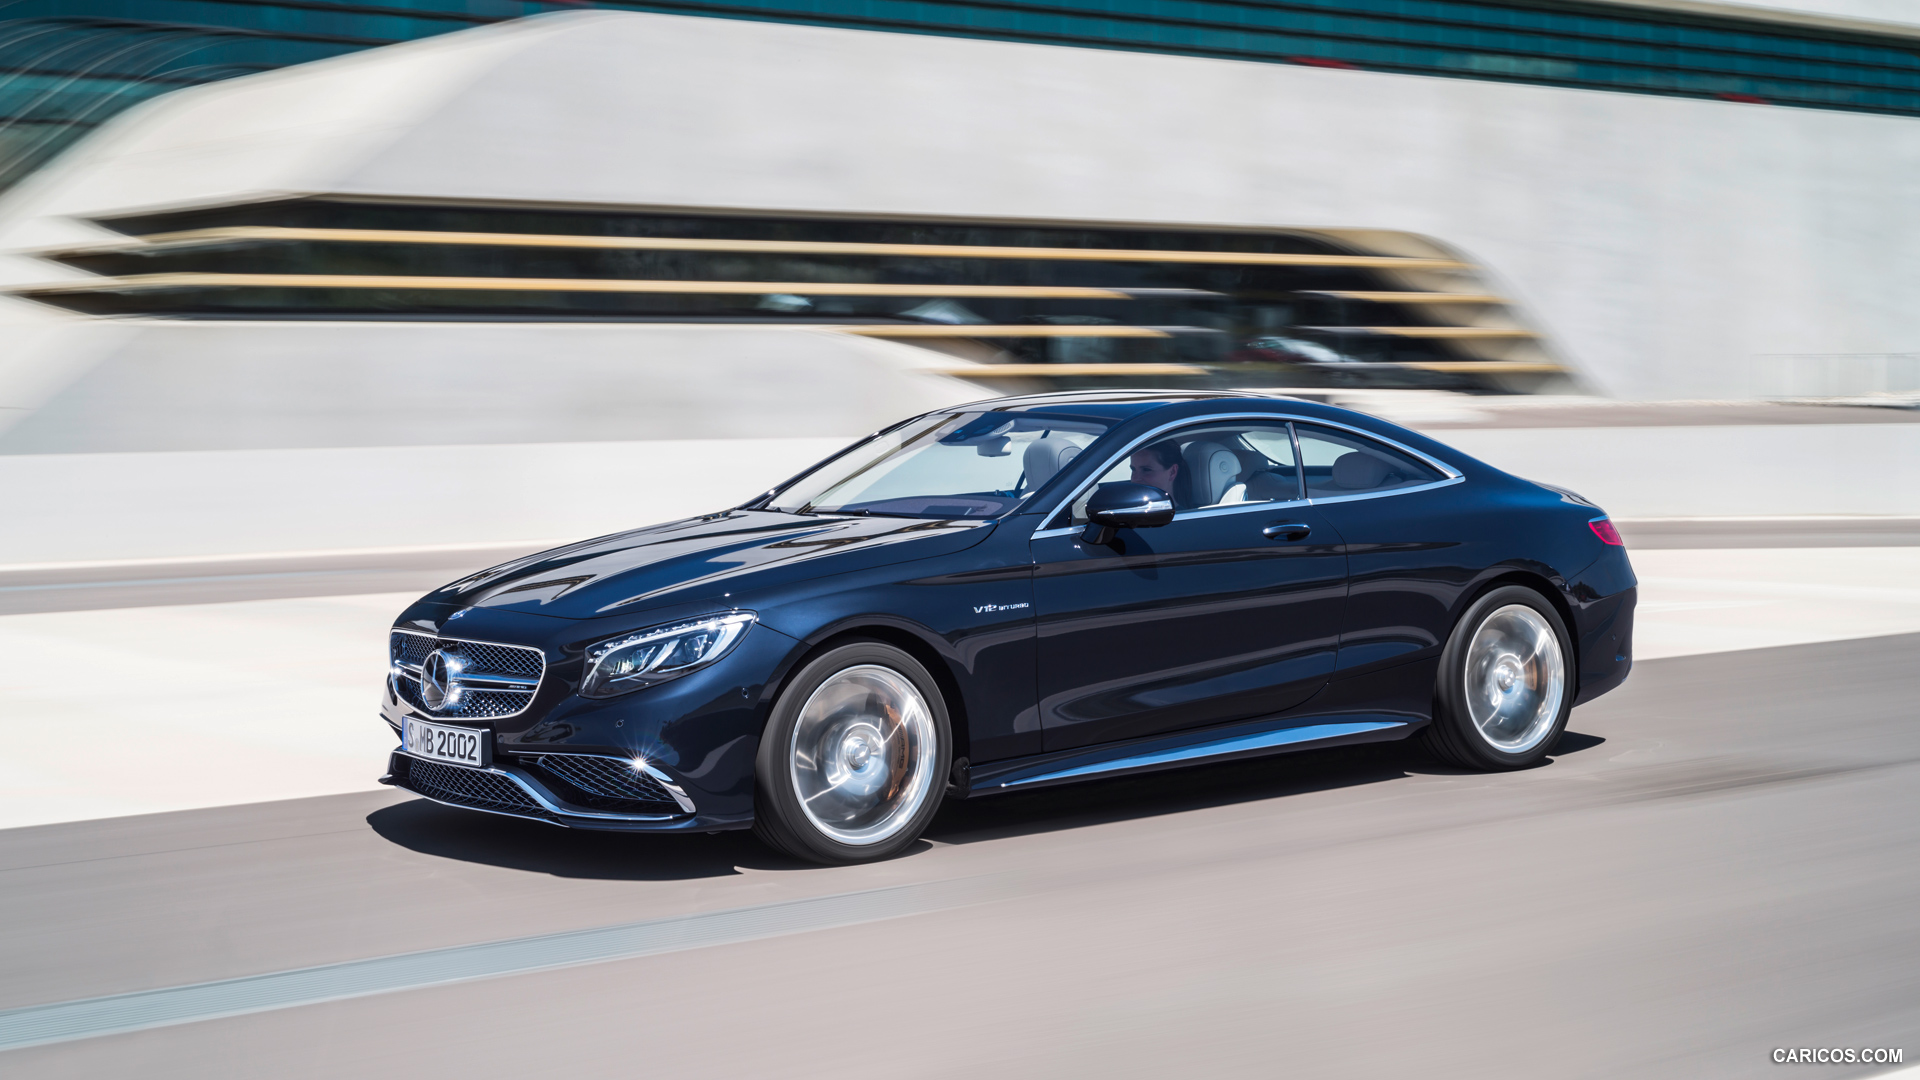 2015 Mercedes-Benz S65 AMG Coupe (Anthracite Blue) - Side, #2 of 101